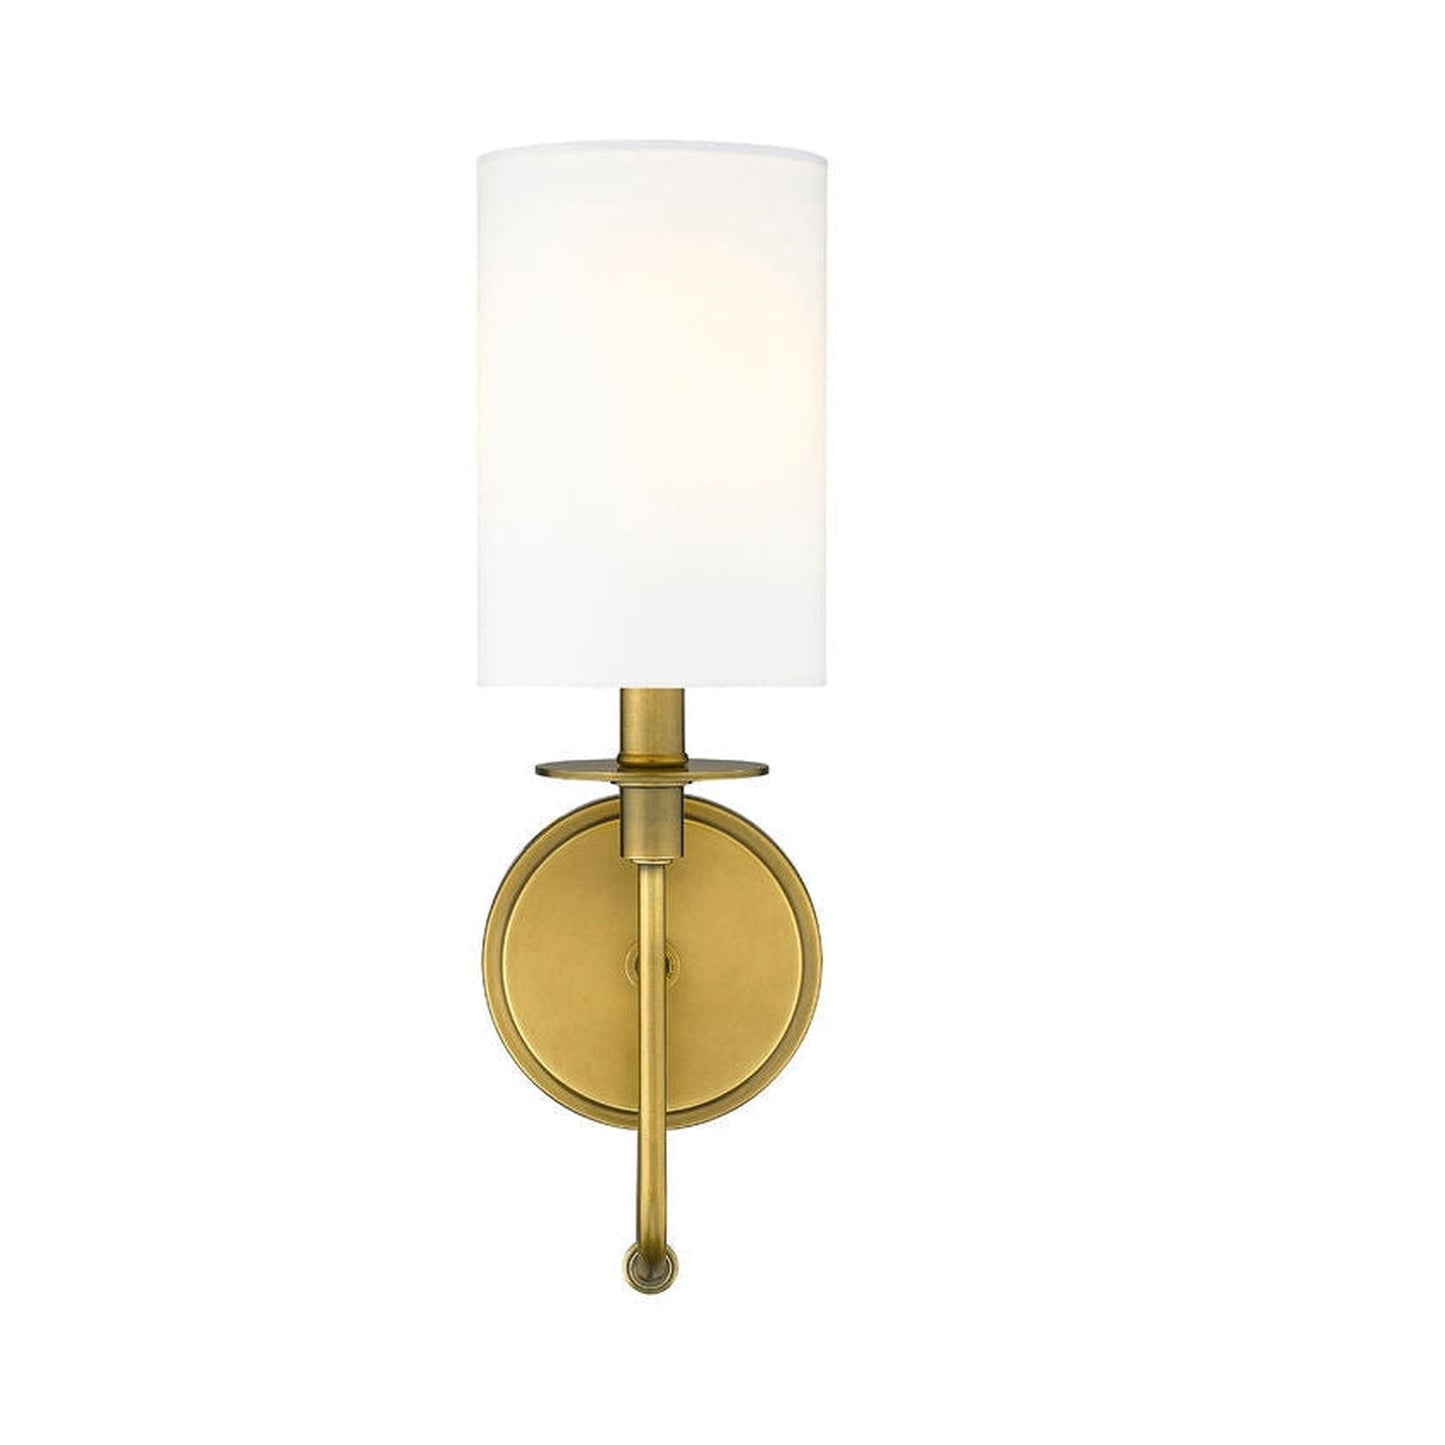 Z-Lite Ella 5" 1-Light White Rubbed Brass Wall Sconce With White Fabric Shade